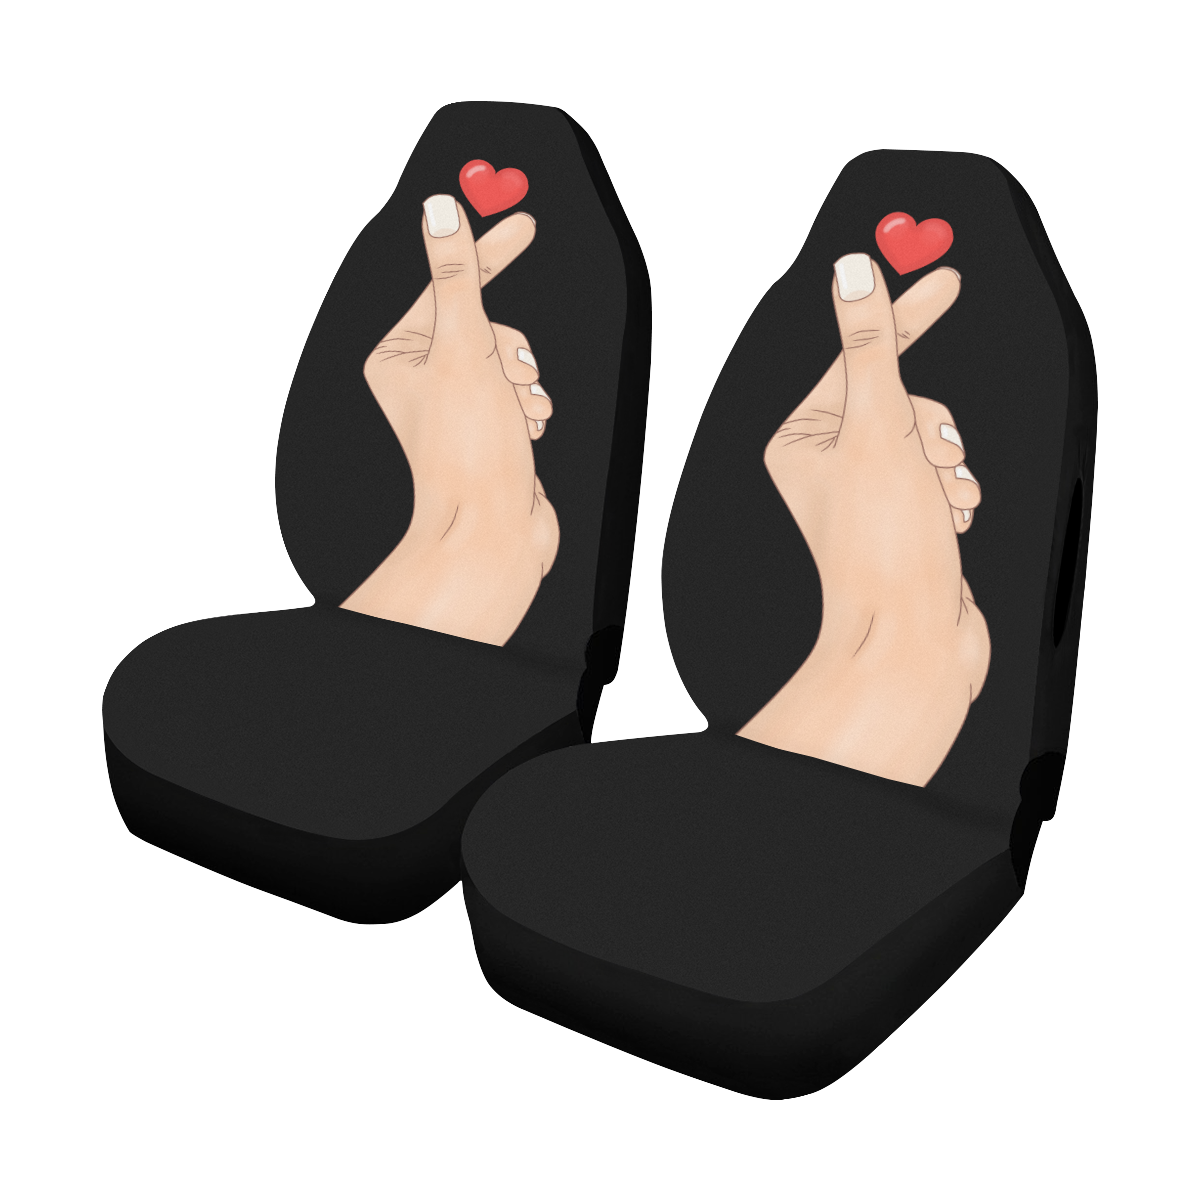 Hand With Finger Heart / Black Car Seat Cover Airbag Compatible (Set of 2)